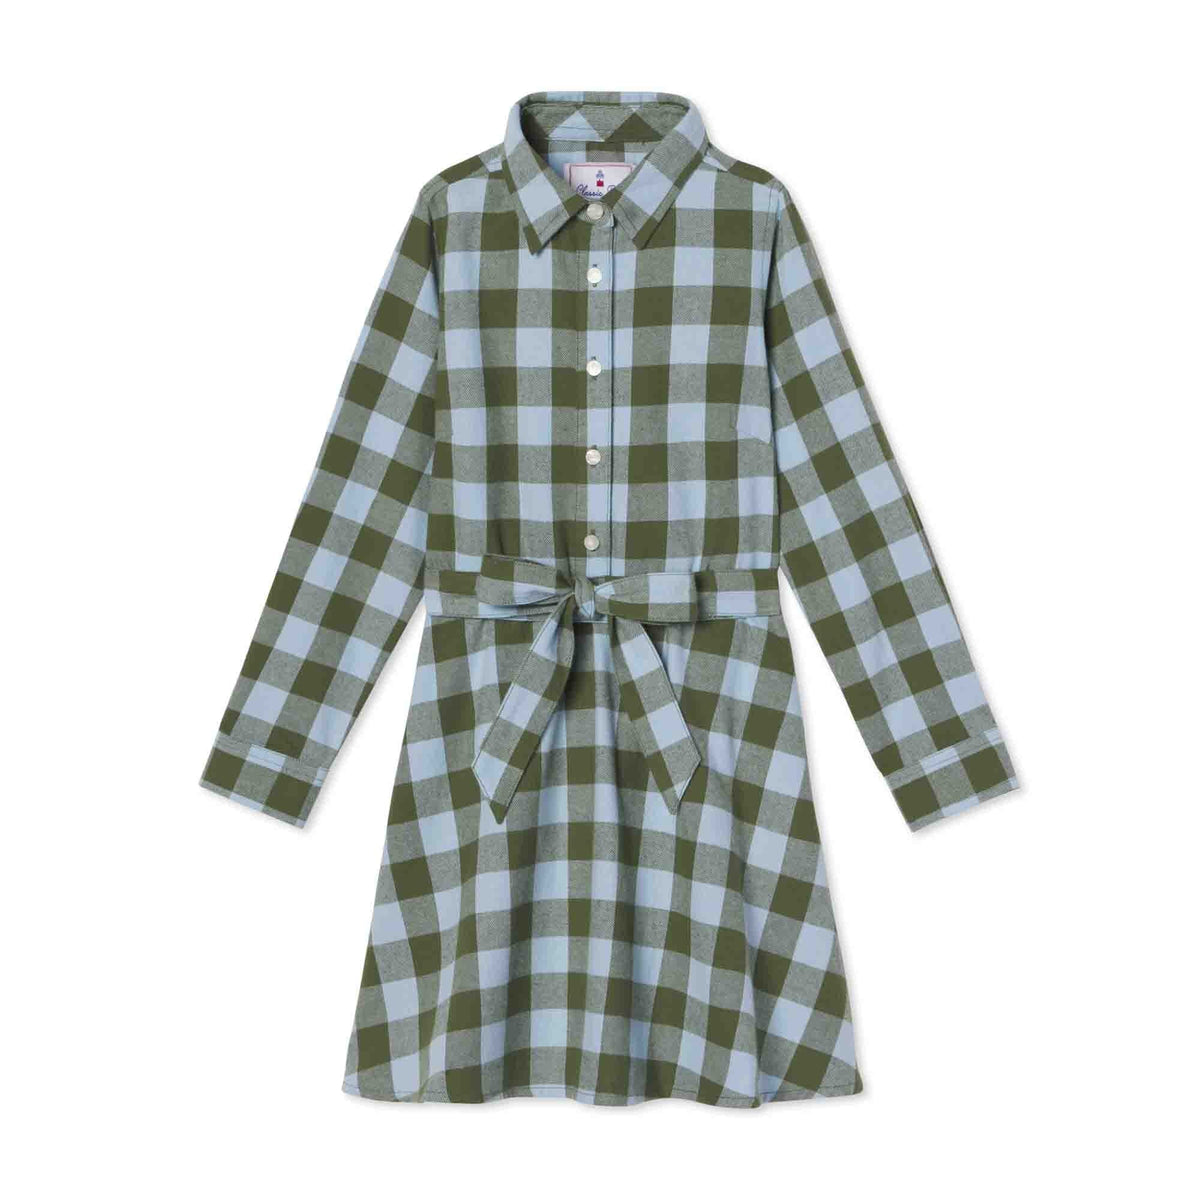 Classic and Preppy Marlowe Shirtdress, Moonrise Gingham Flannel-Dresses, Jumpsuits and Rompers-Moonrise Gingham-5Y-CPC - Classic Prep Childrenswear